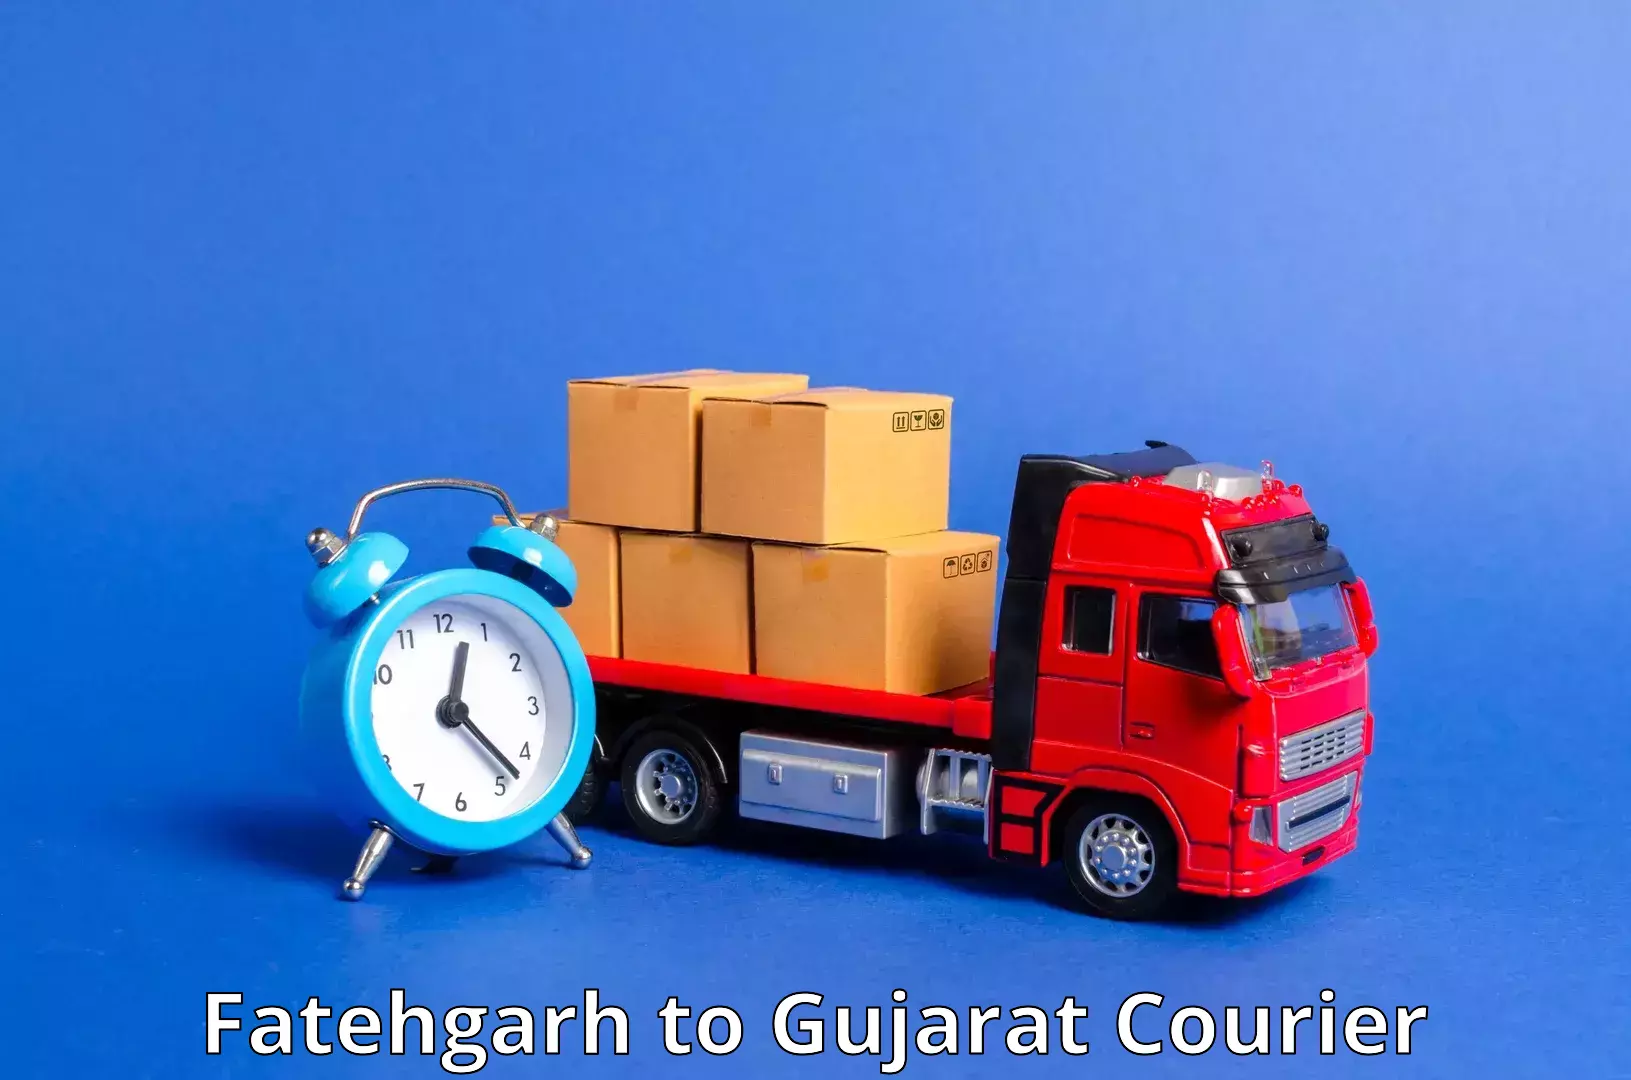 Global shipping networks in Fatehgarh to Rajpipla